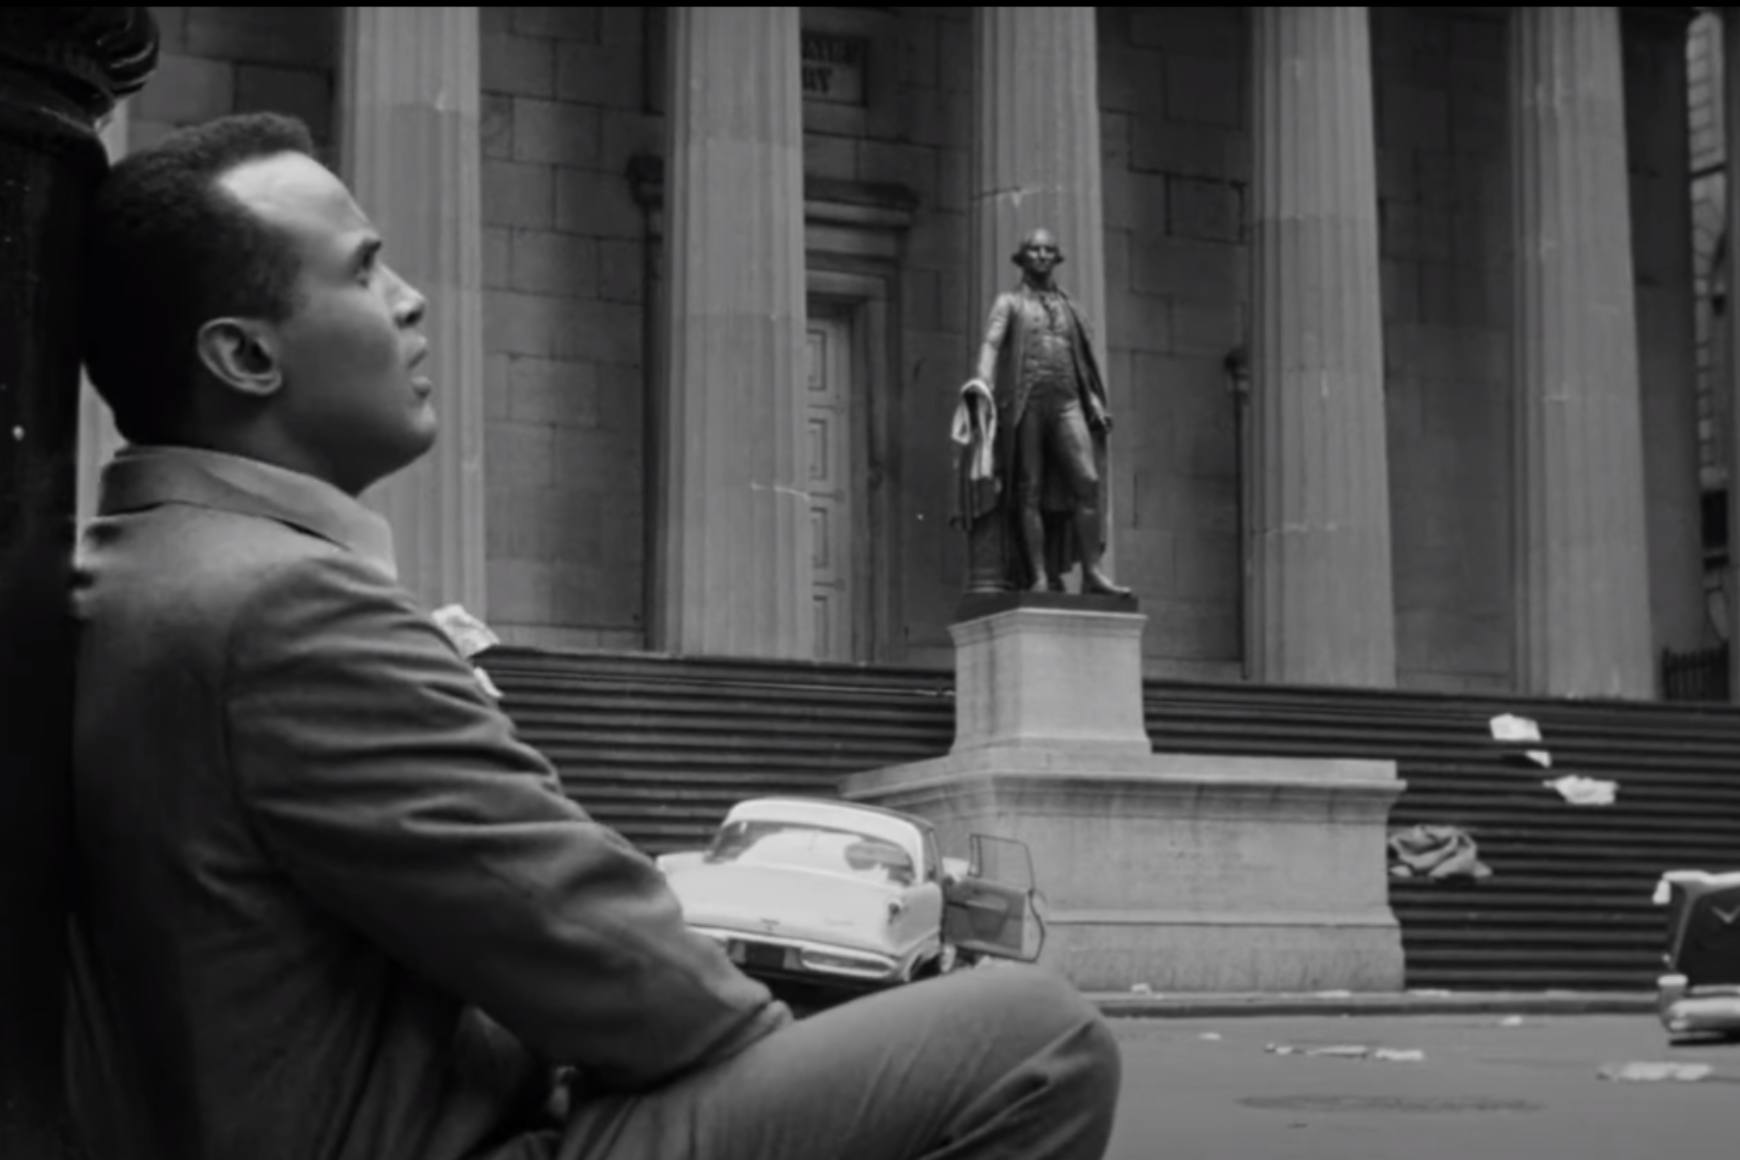 A back and white still of the movie. Harry Belafonte sits leaning on a lampost in a deserted New York.